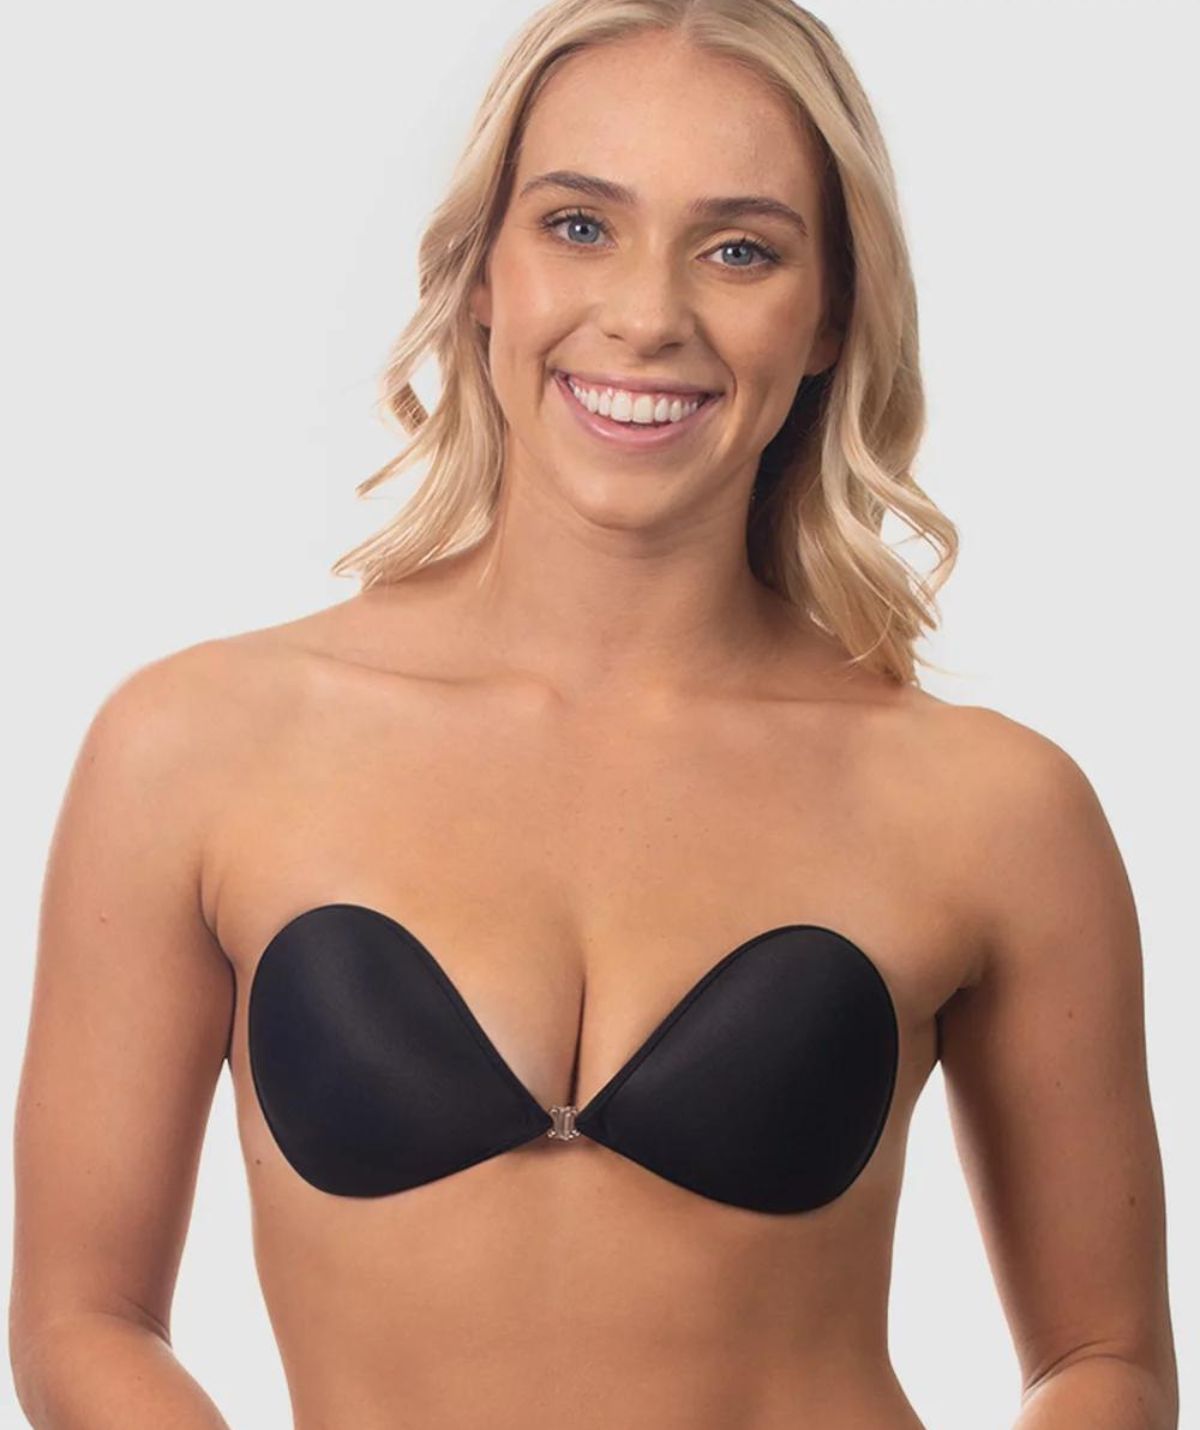 The Best Stick-On Bras and Bra Tape For Your Next Event